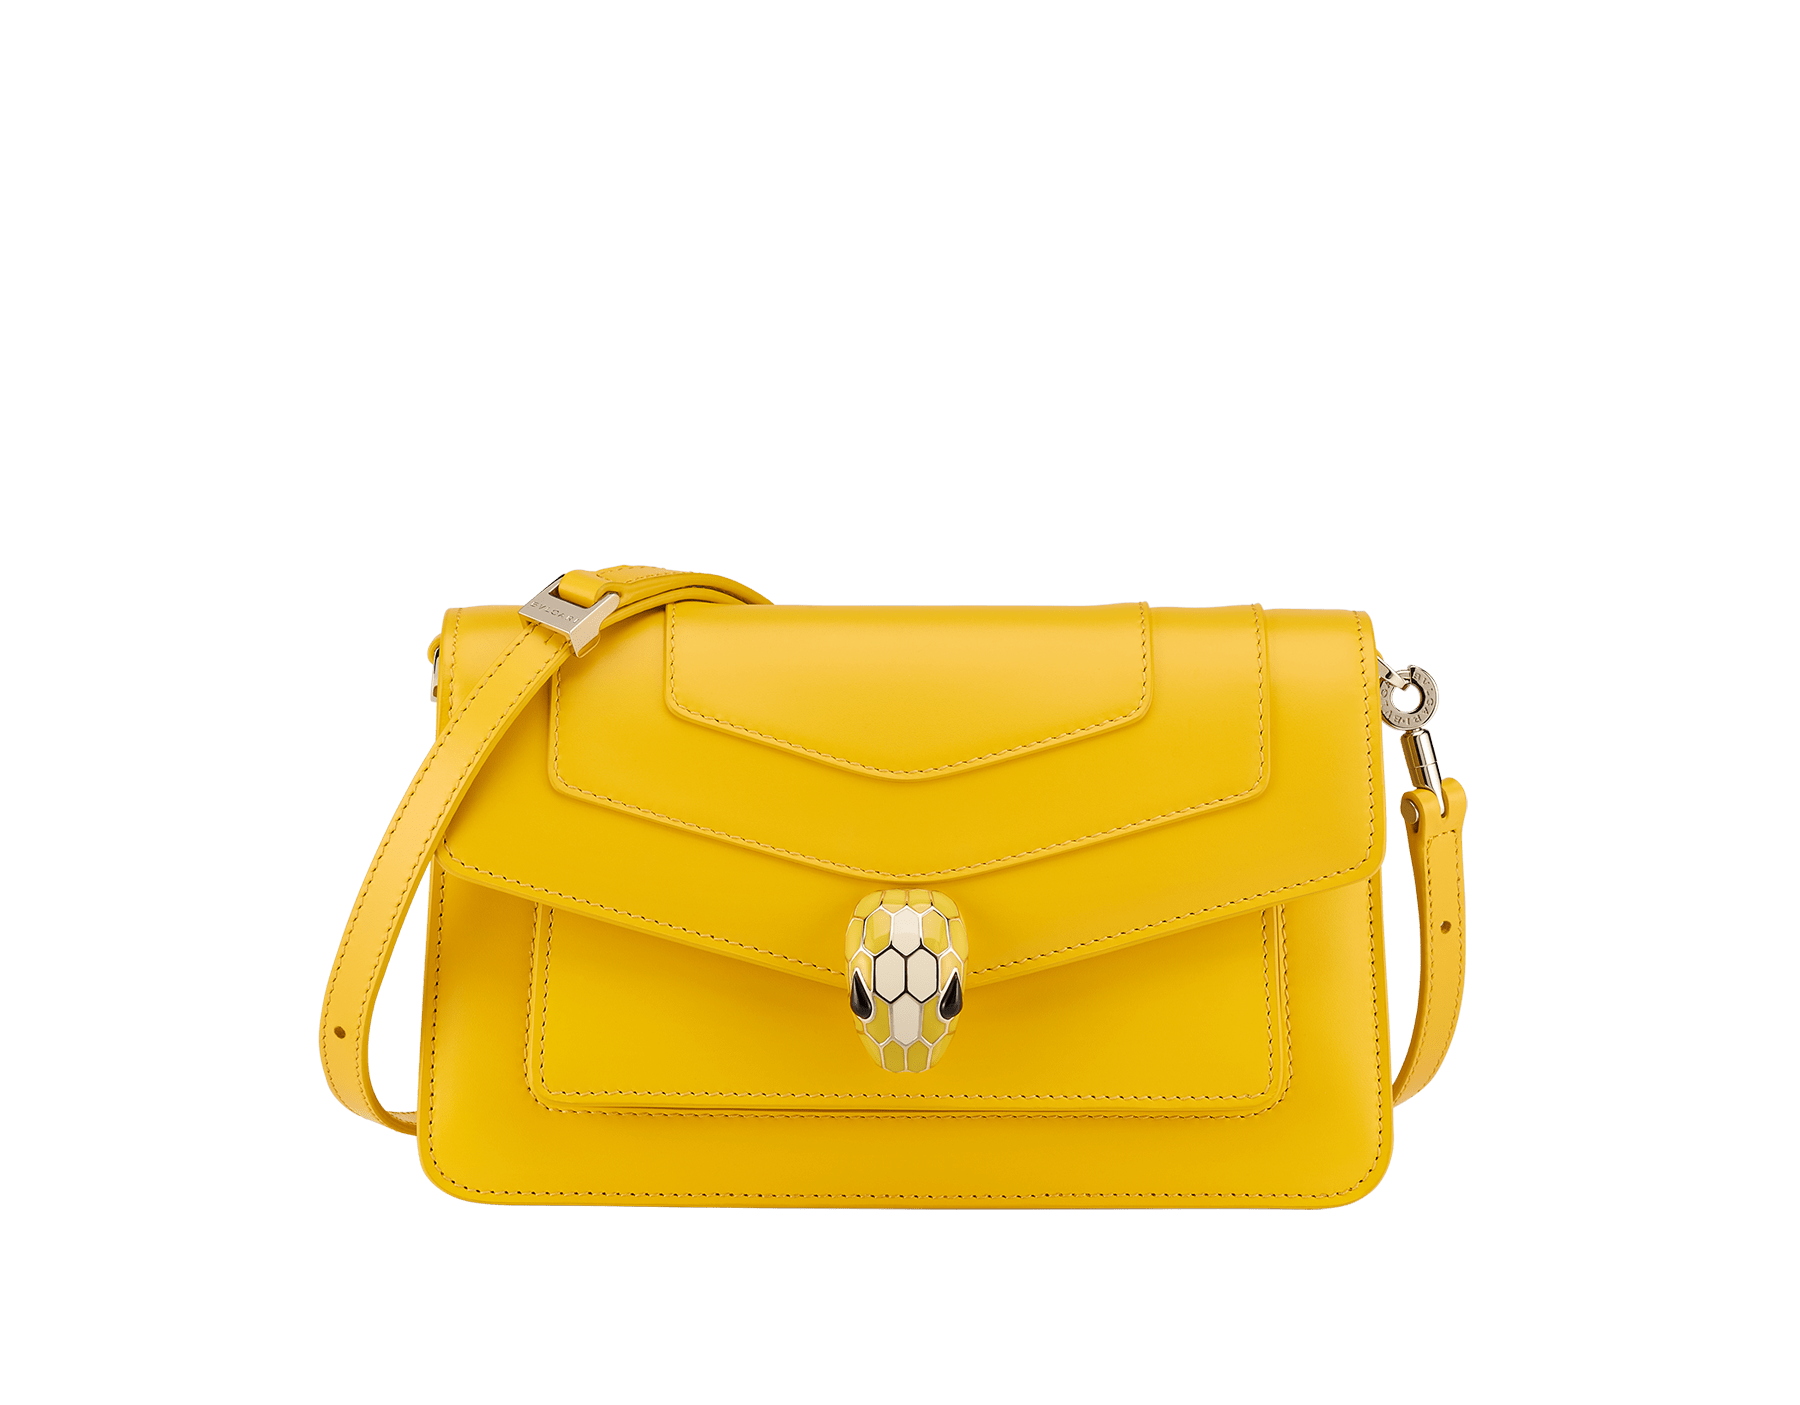 Serpenti Forever East-West small shoulder bag in sun citrine yellow calf leather with linen agate beige grosgrain lining. Captivating snakehead magnetic closure in light gold-plated brass embellished with sun citrine yellow and white agate enamel scales, and black onyx eyes. 1237-CL image 1